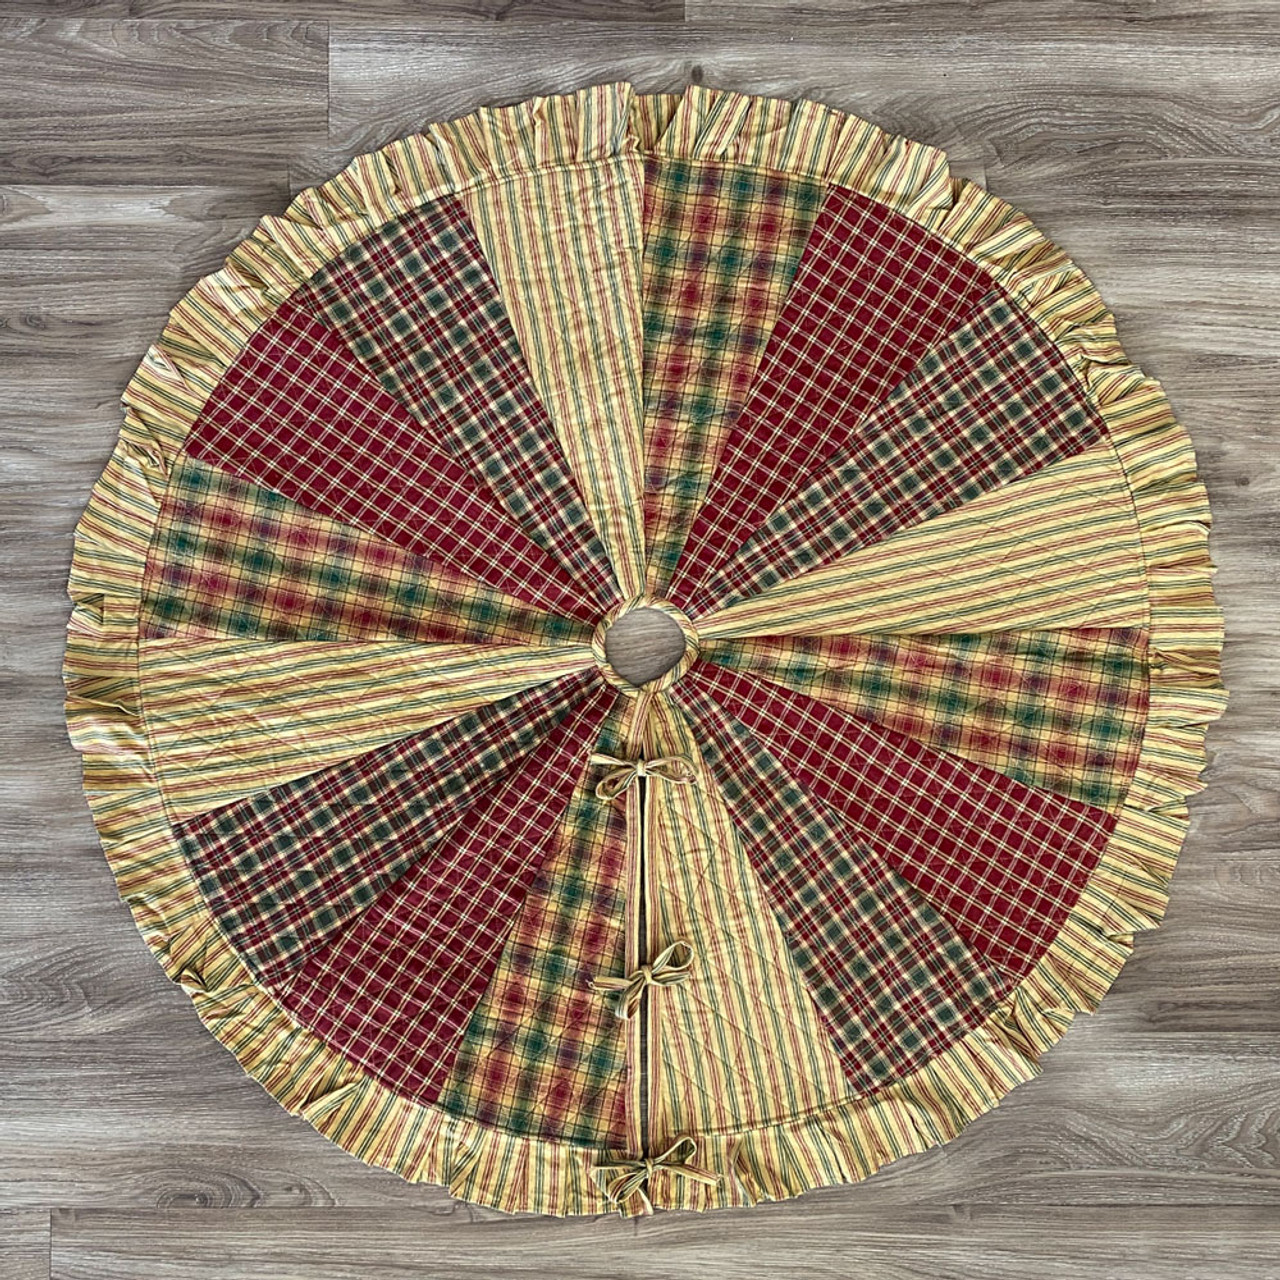 48" Vintage Christmas Quilted Homespun Plaid Tree Skirt by Marilee Home